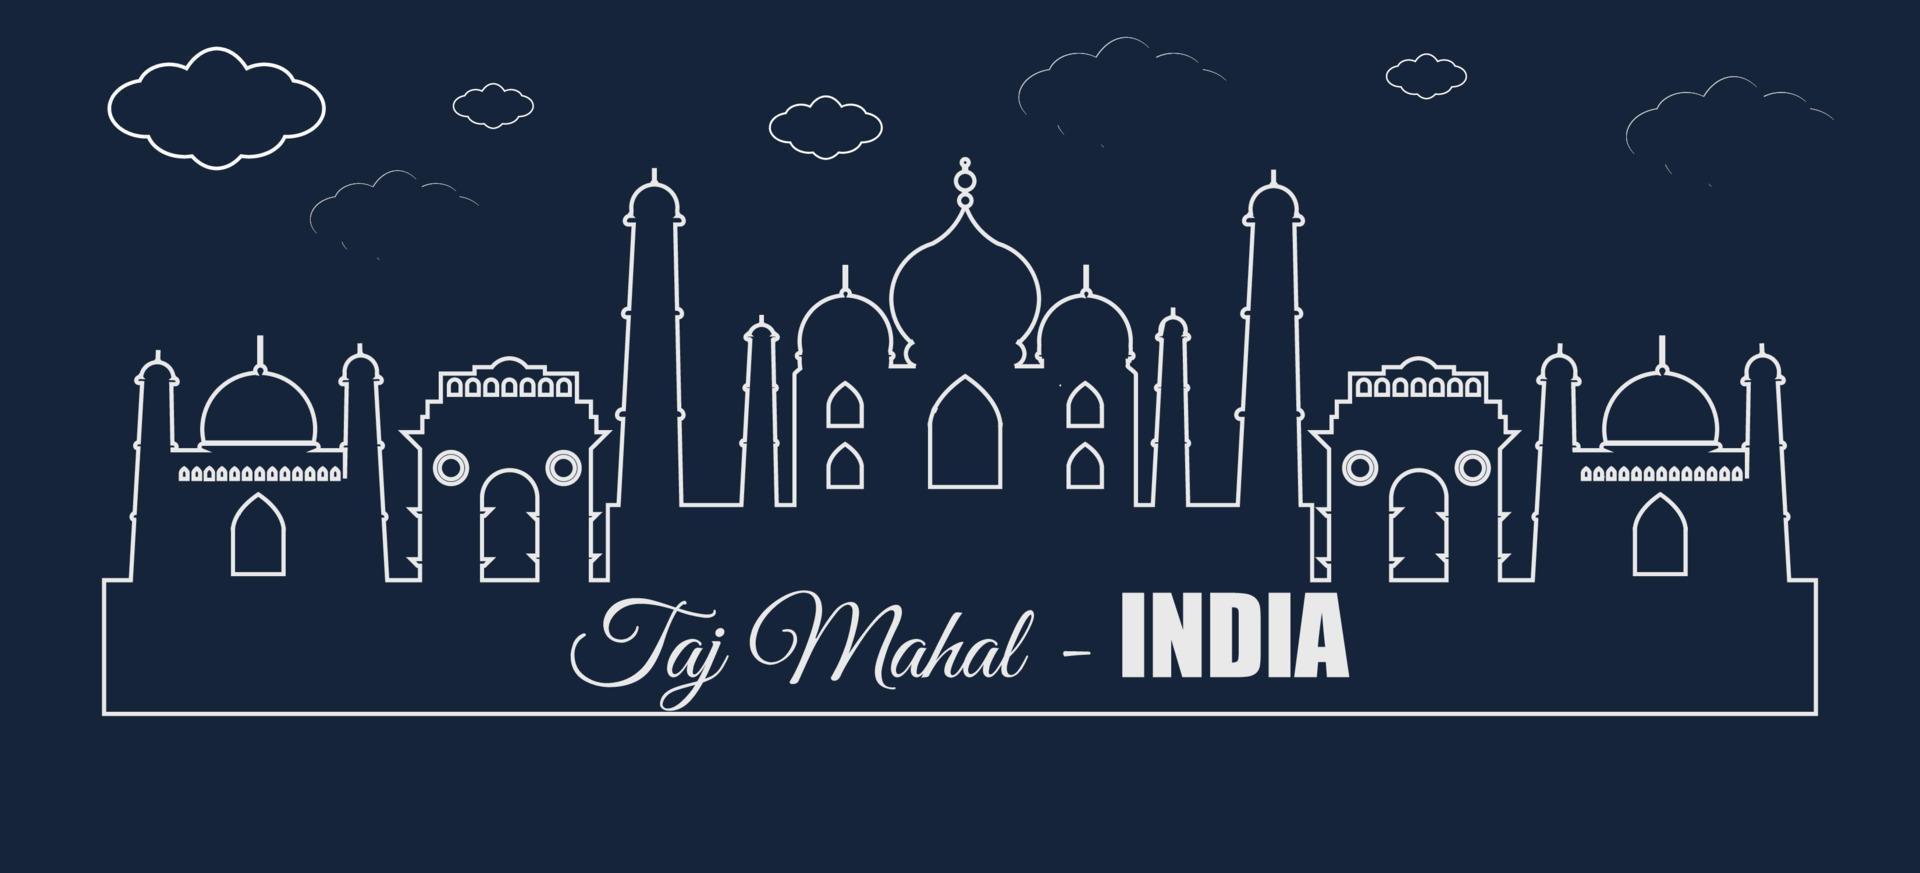 Taj mahal of india with paper cut style vector